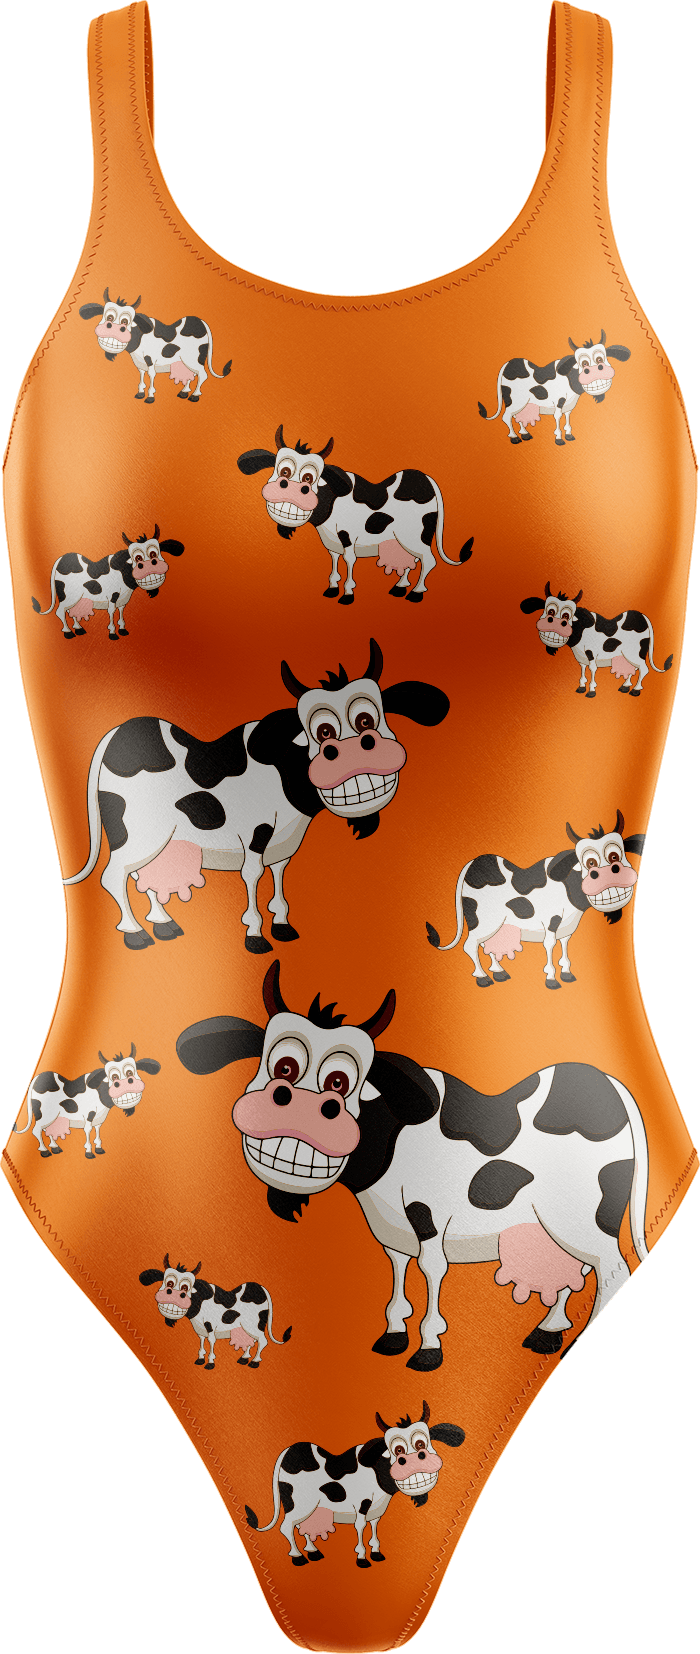 Fussy Cow Swimsuits - fungear.com.au